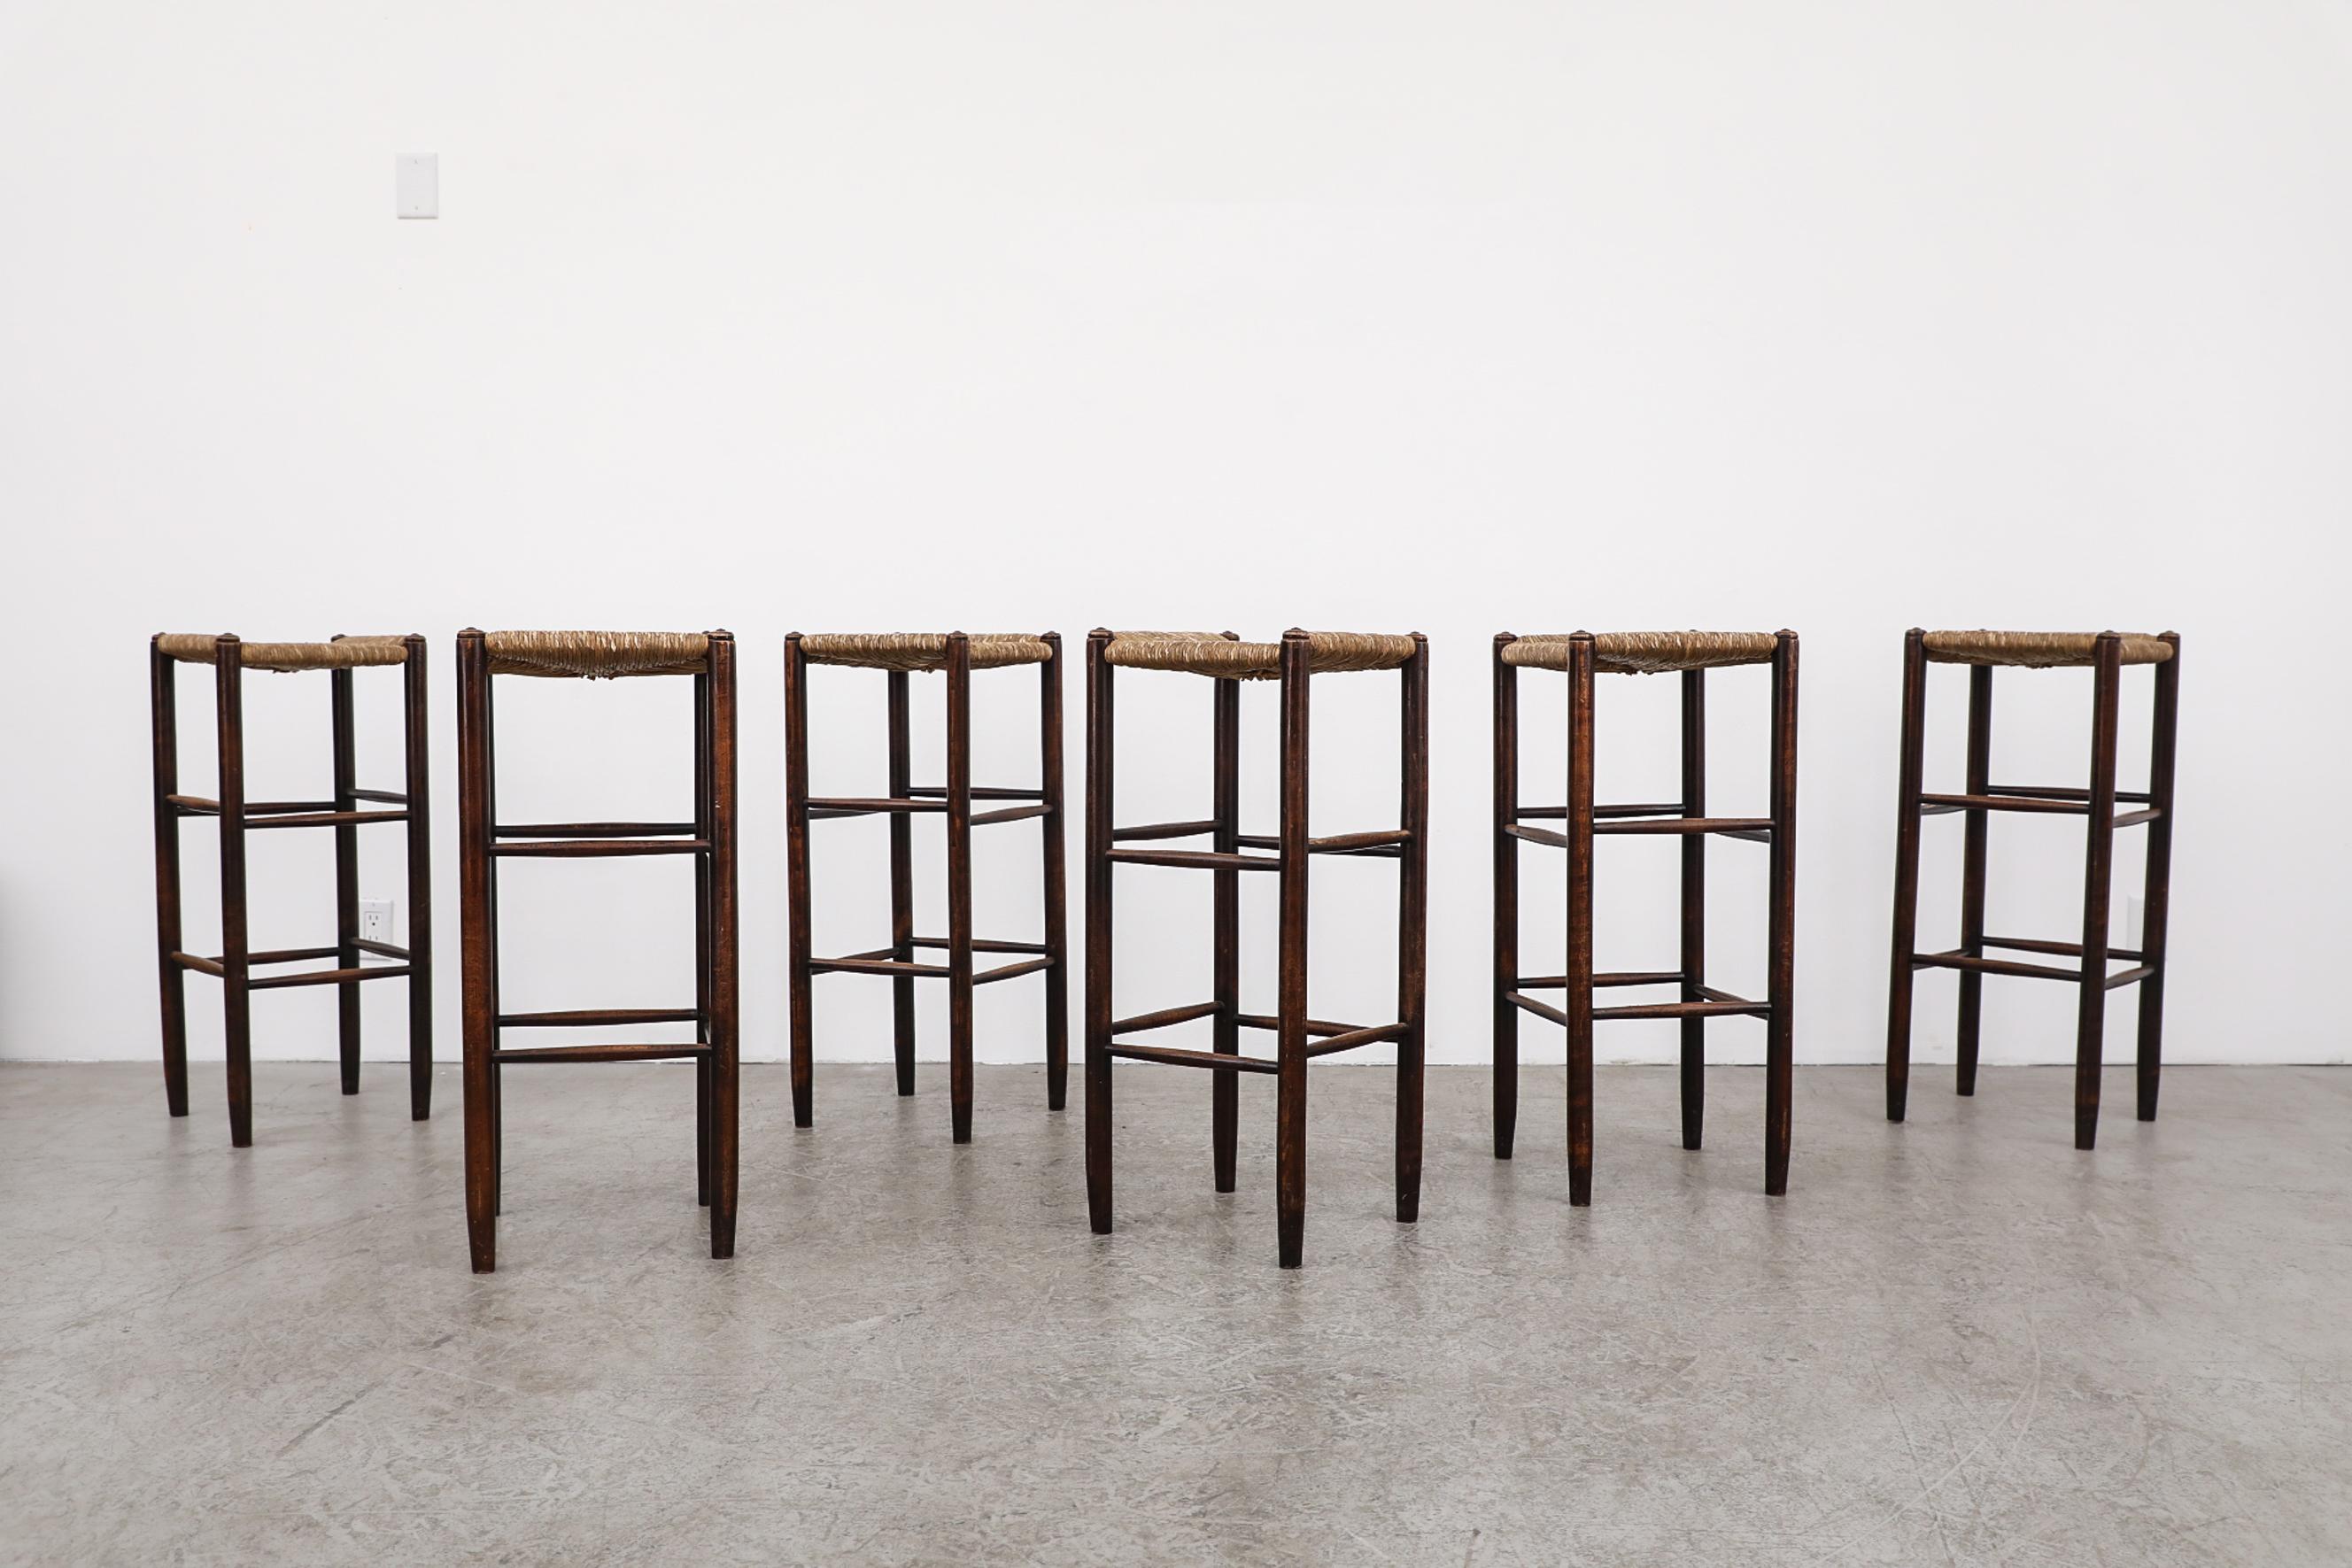 Set of 6 tall bar stools with wood frame and rush seats. Seat height is 32